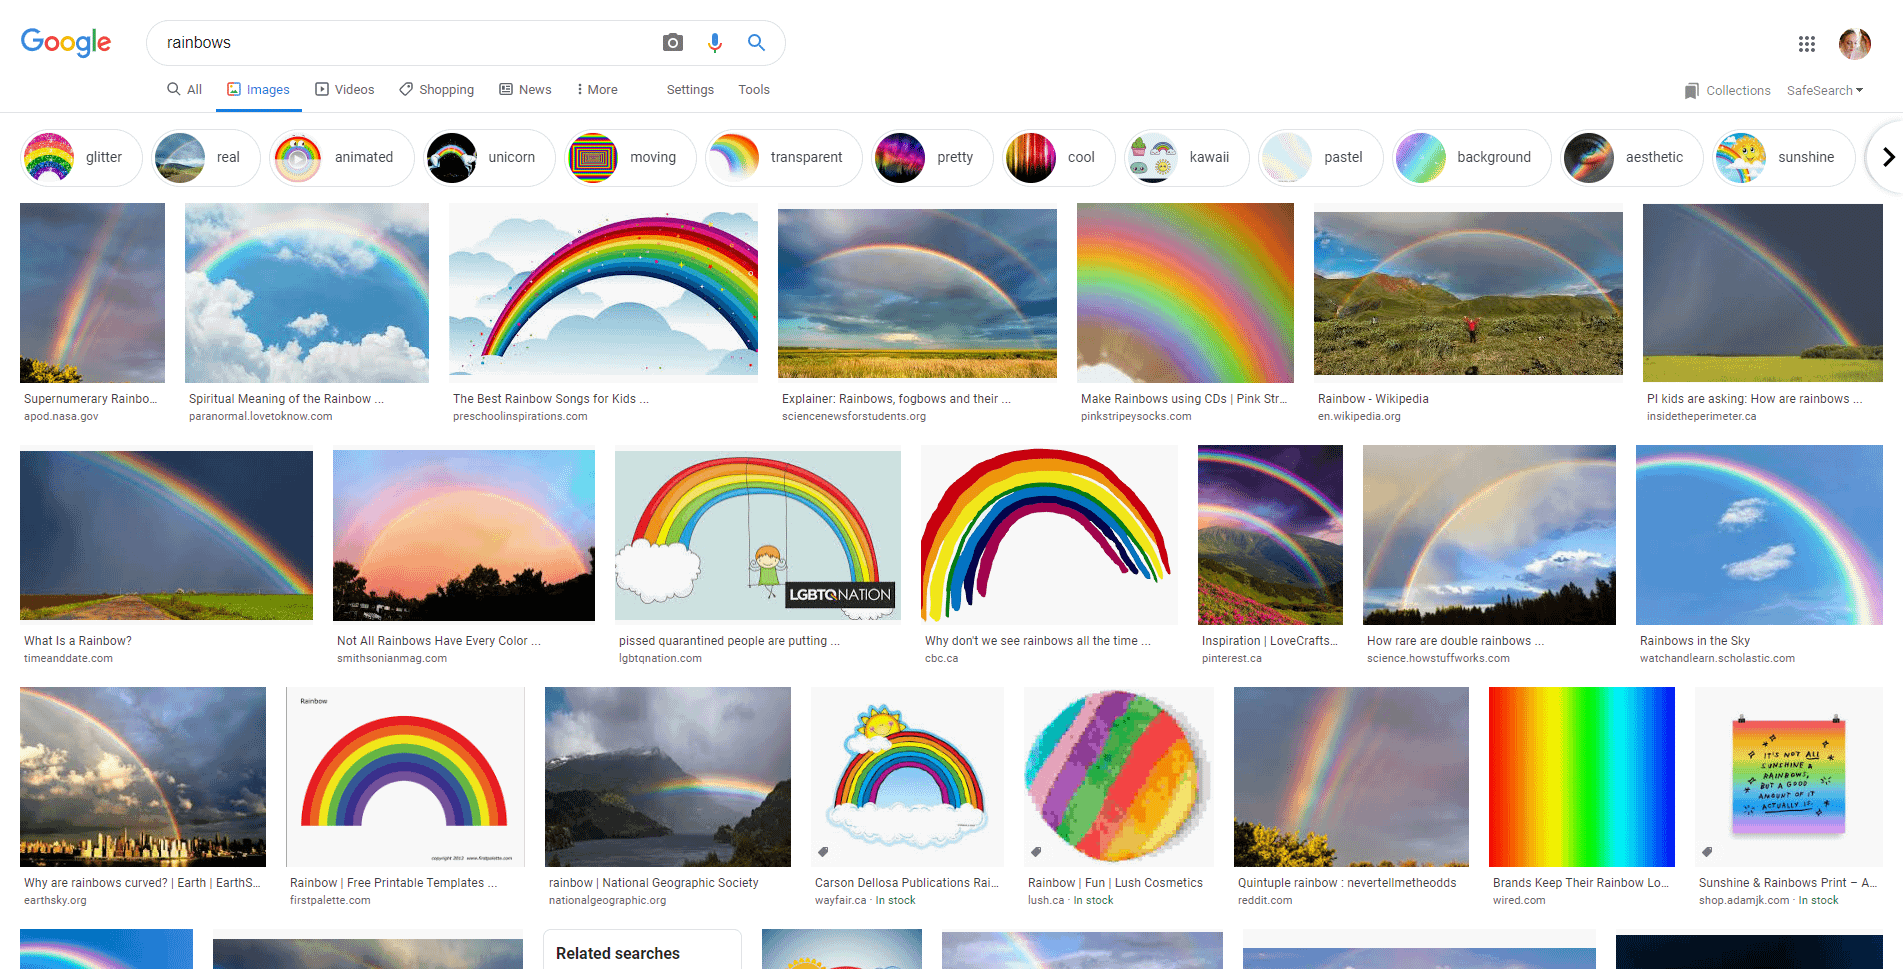 Image search of Rainbows